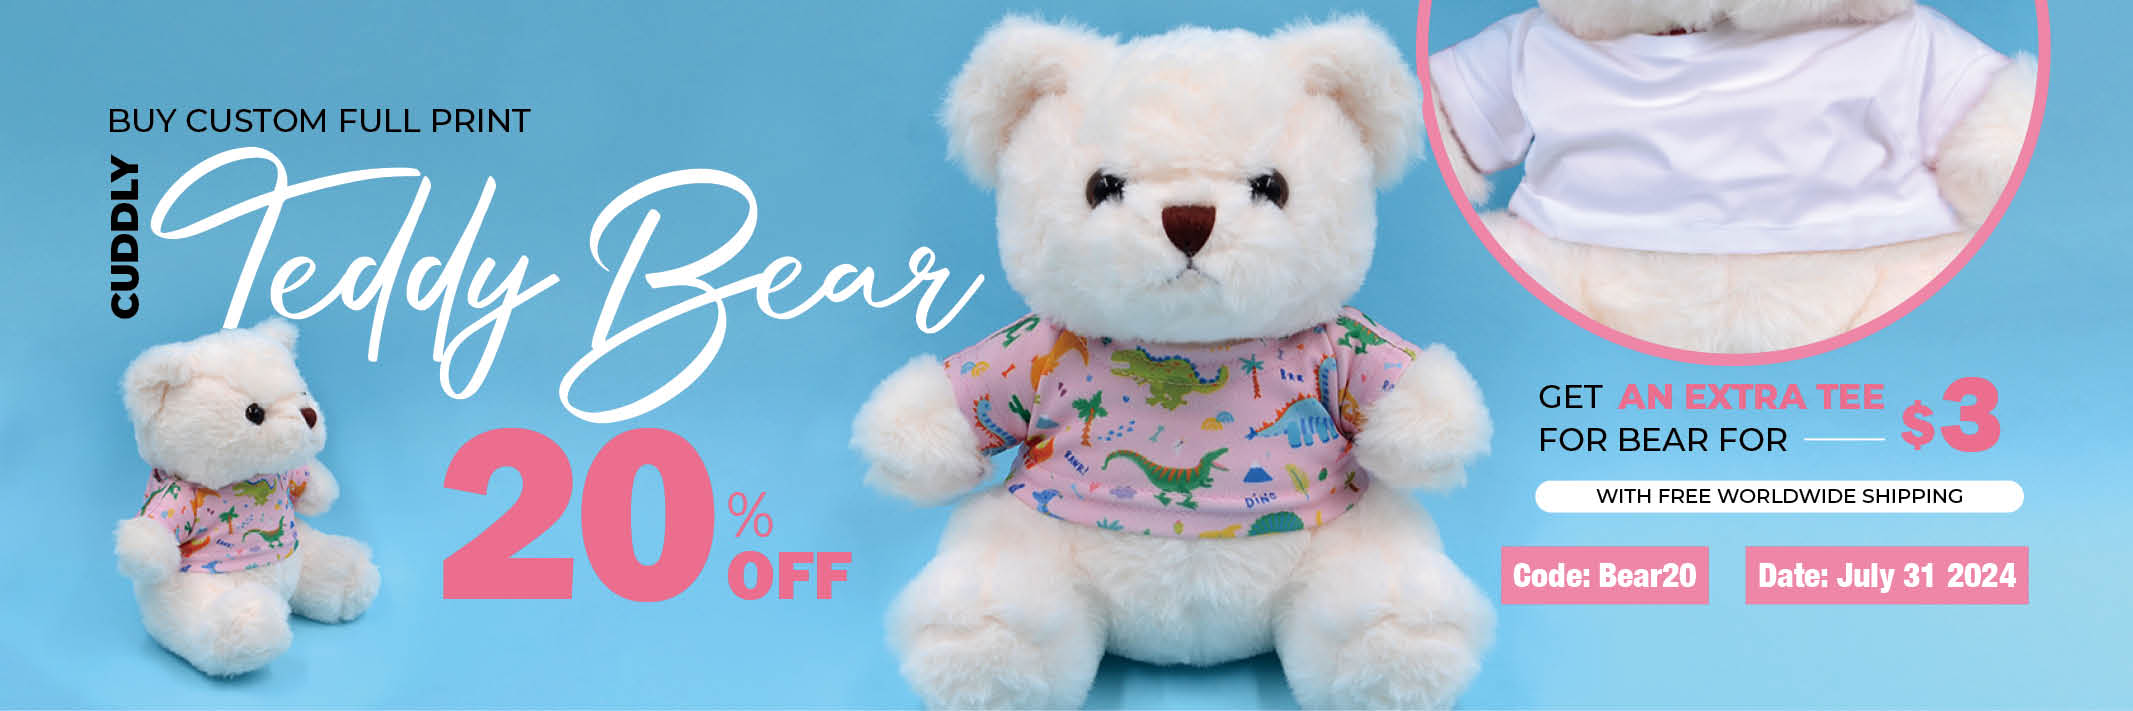 Buy Custom Full Print Cuddly Teddy Bear 20% Off & get an extra Tee For Bear for $3 with Free Worldwide Shipping